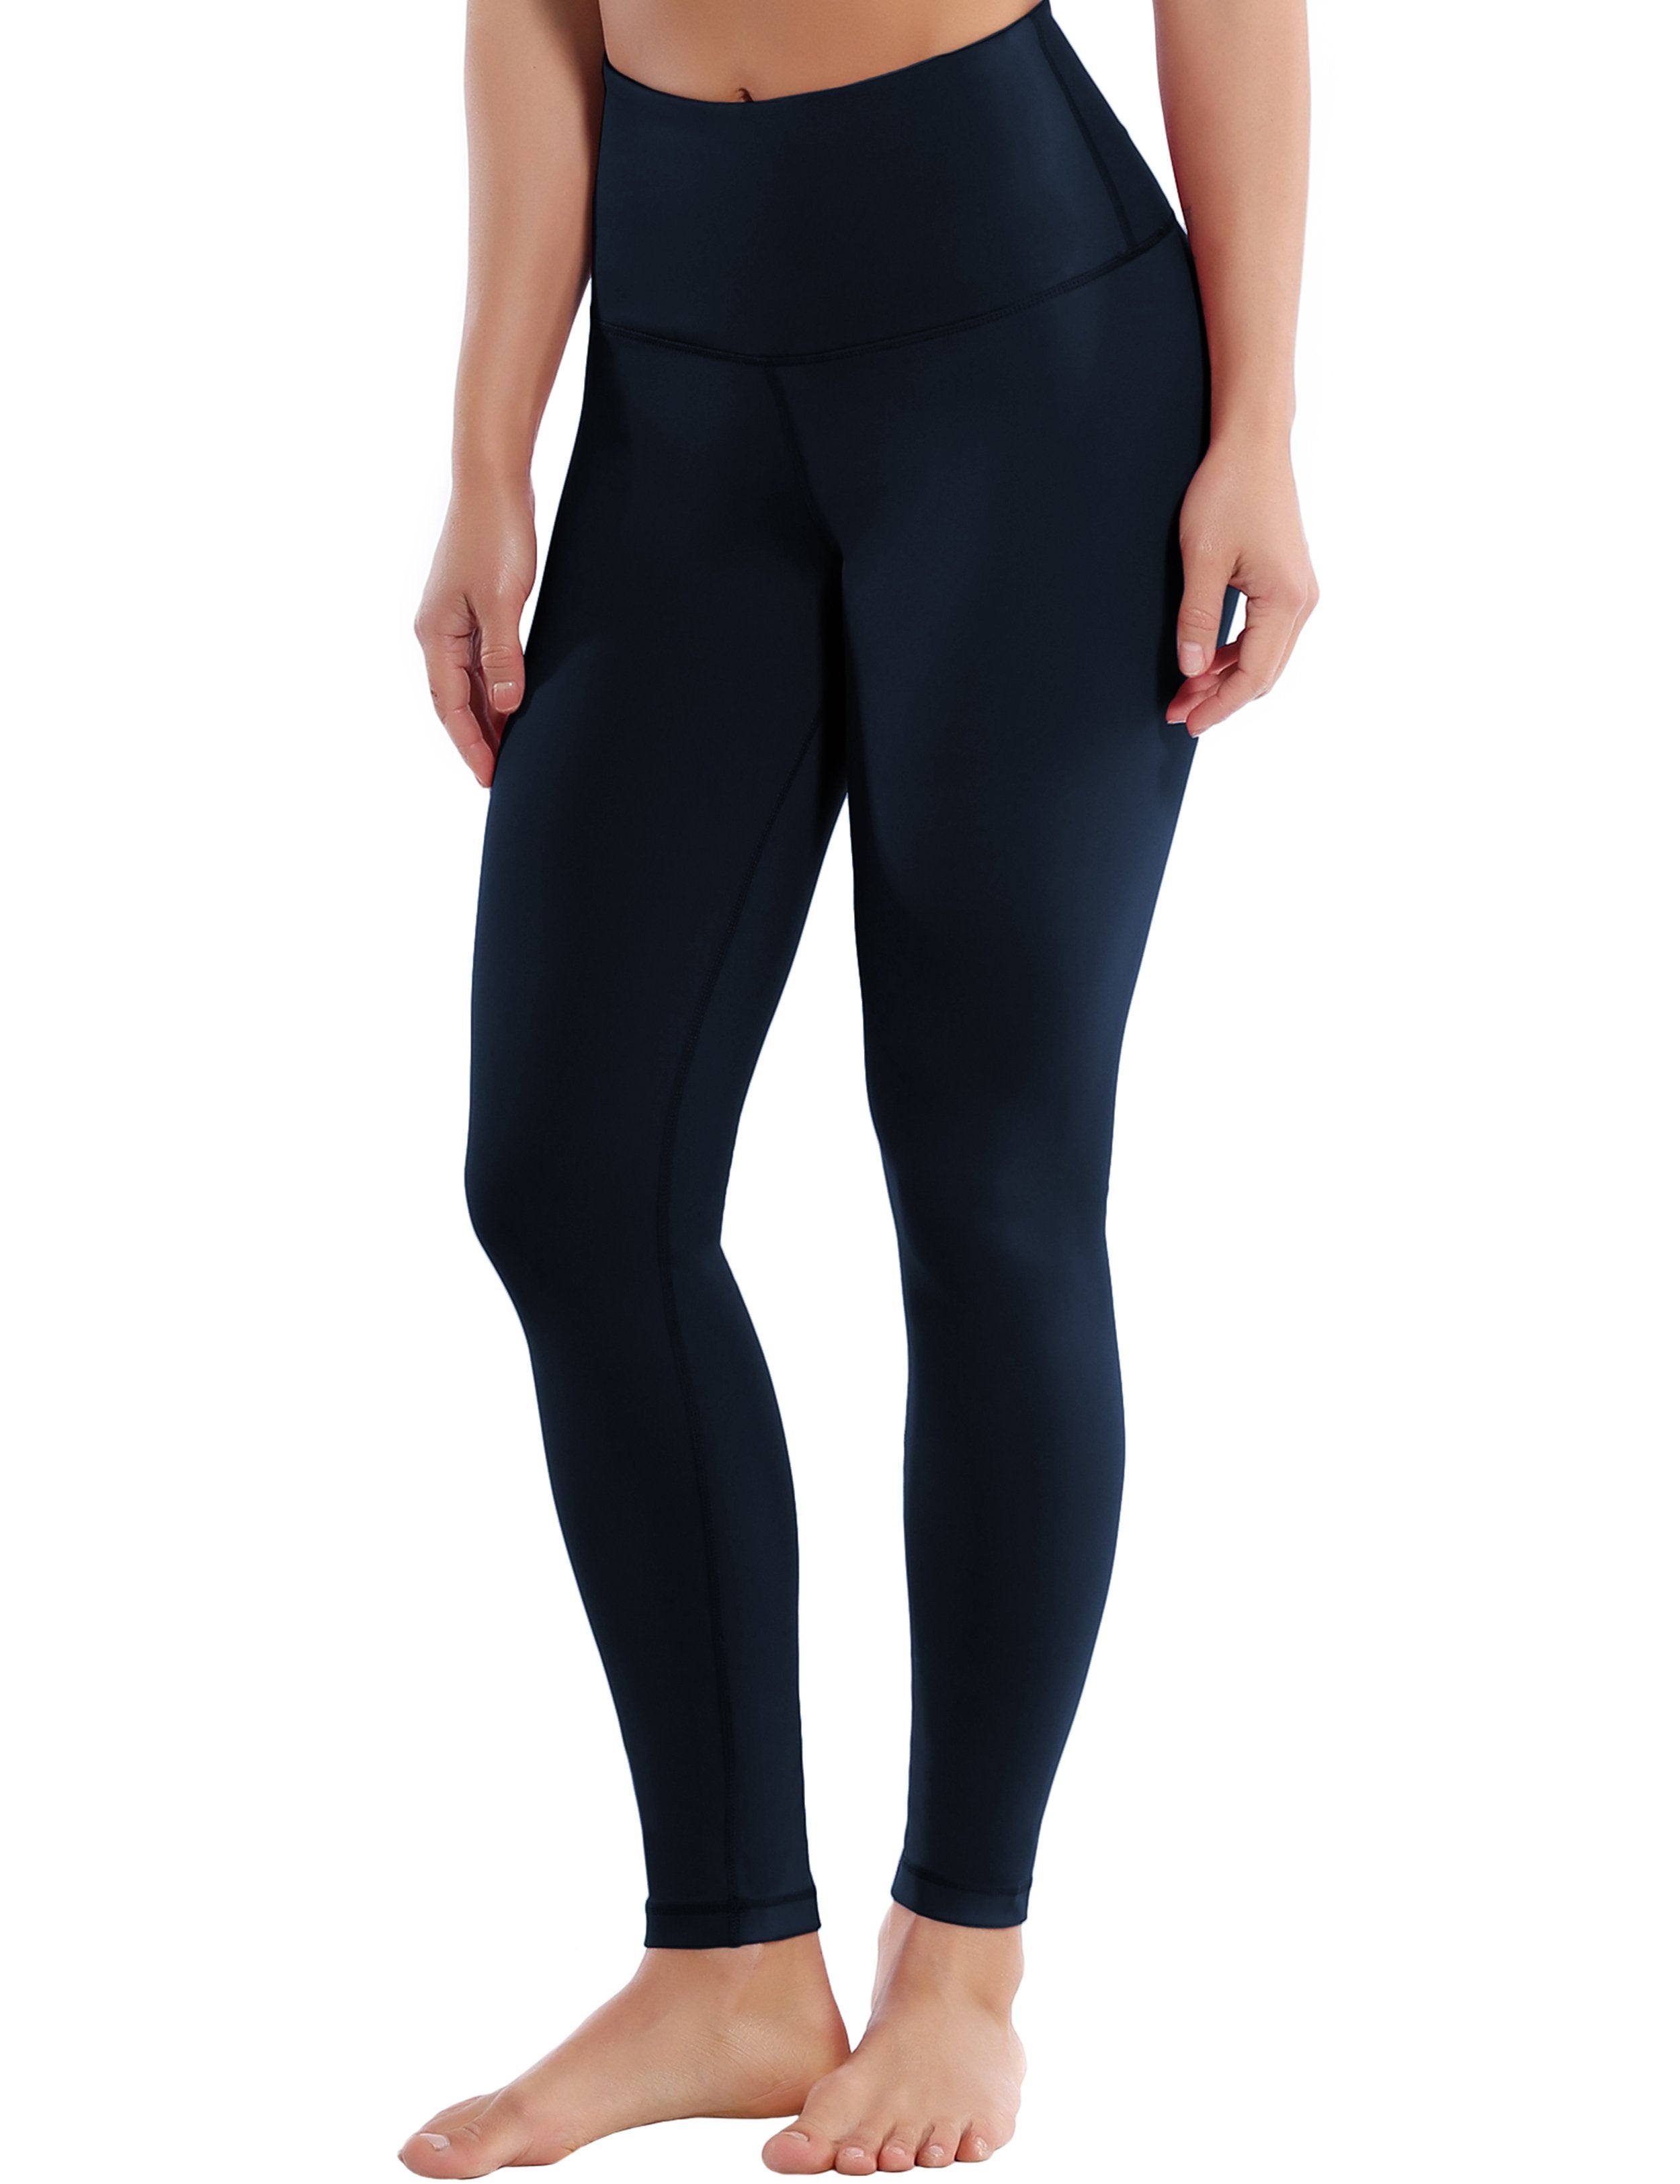 High Waist Pilates Pants darknavy 75%Nylon/25%Spandex Fabric doesn't attract lint easily 4-way stretch No see-through Moisture-wicking Tummy control Inner pocket Four lengths